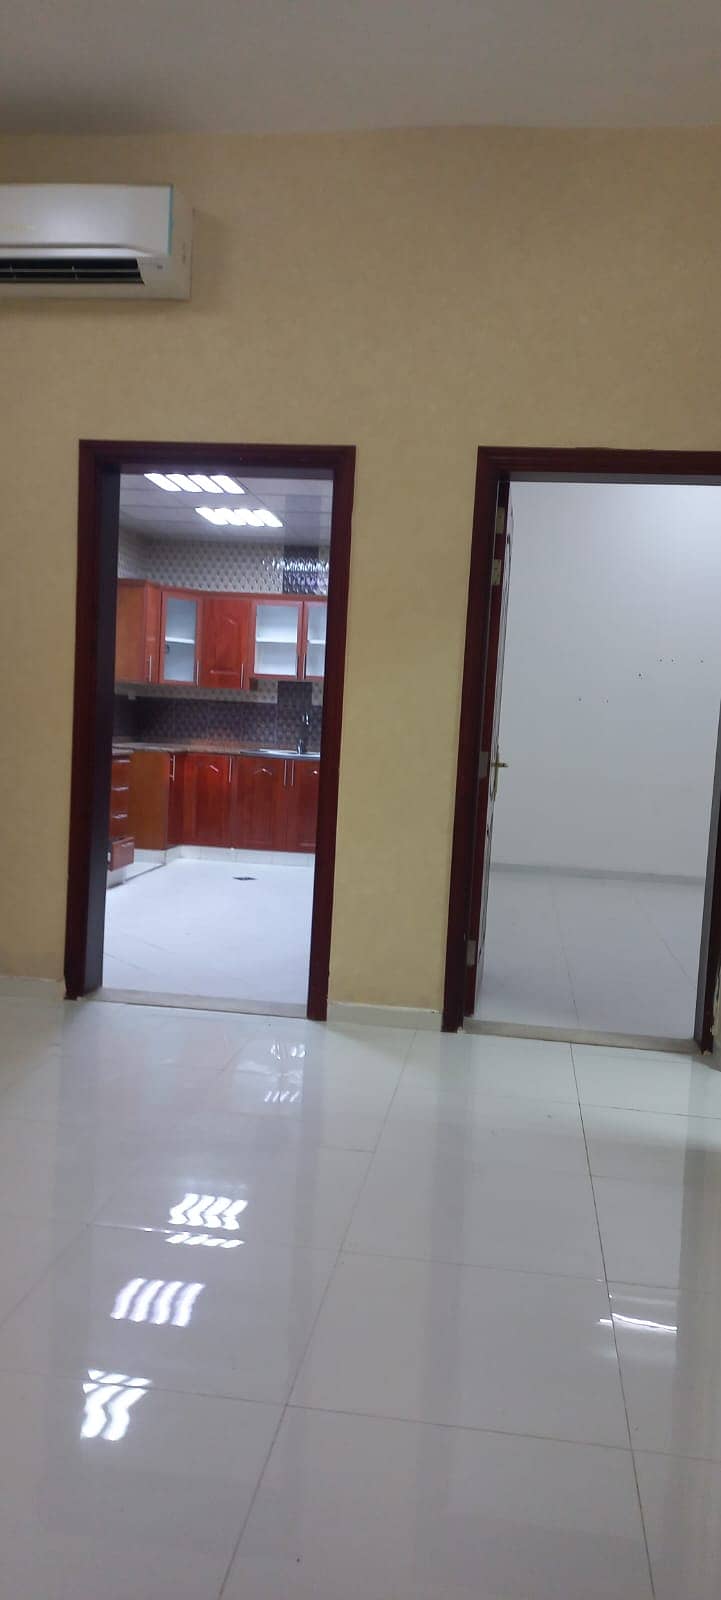 PARTMENT FOR RENT IN SHWAMEKH